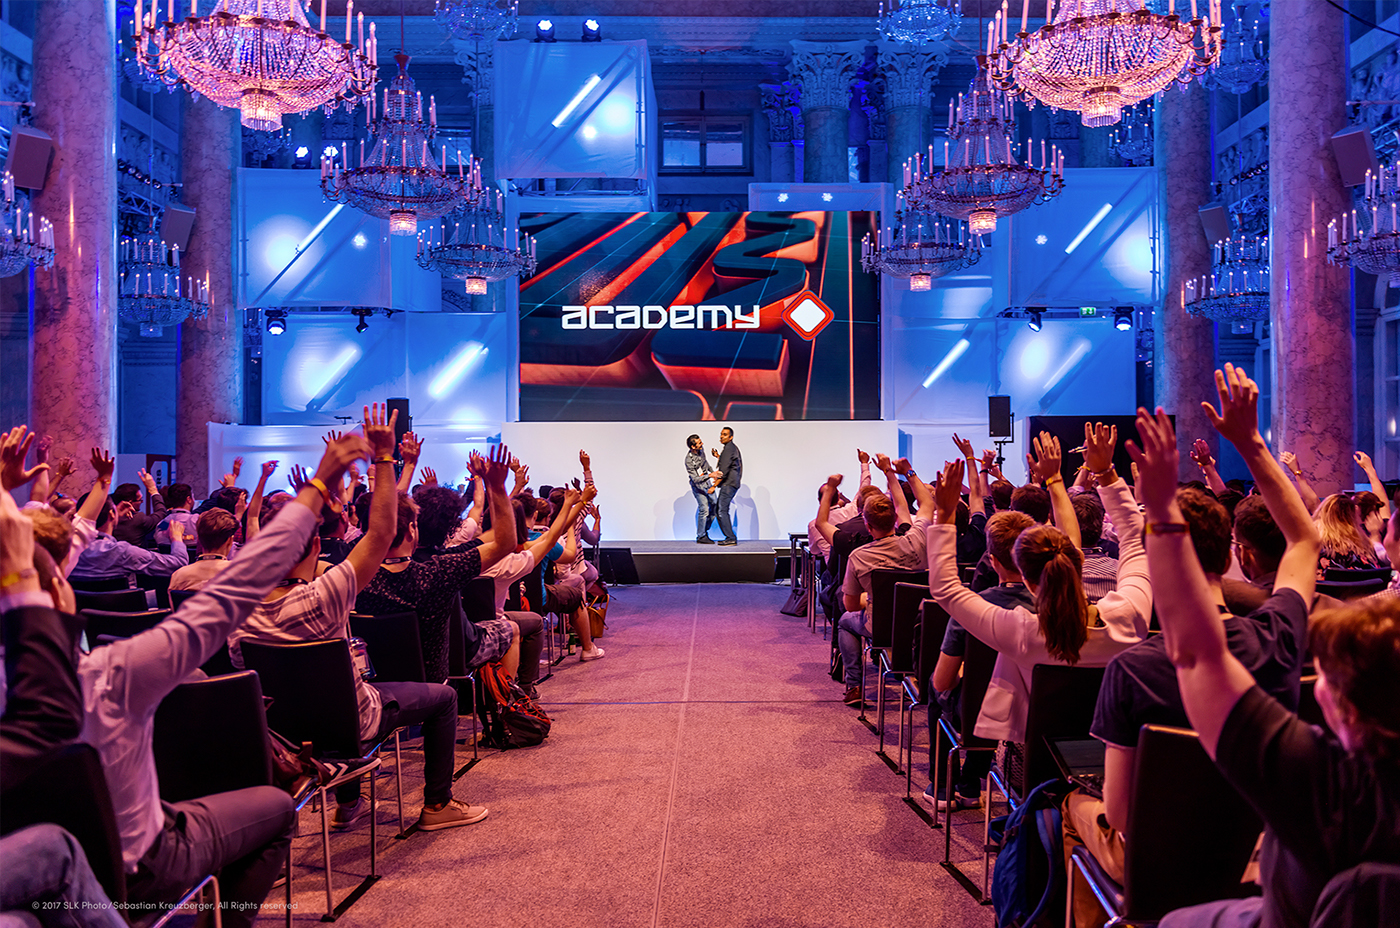 Pioneers festival Fintech mobility Startup agenda design system Technology